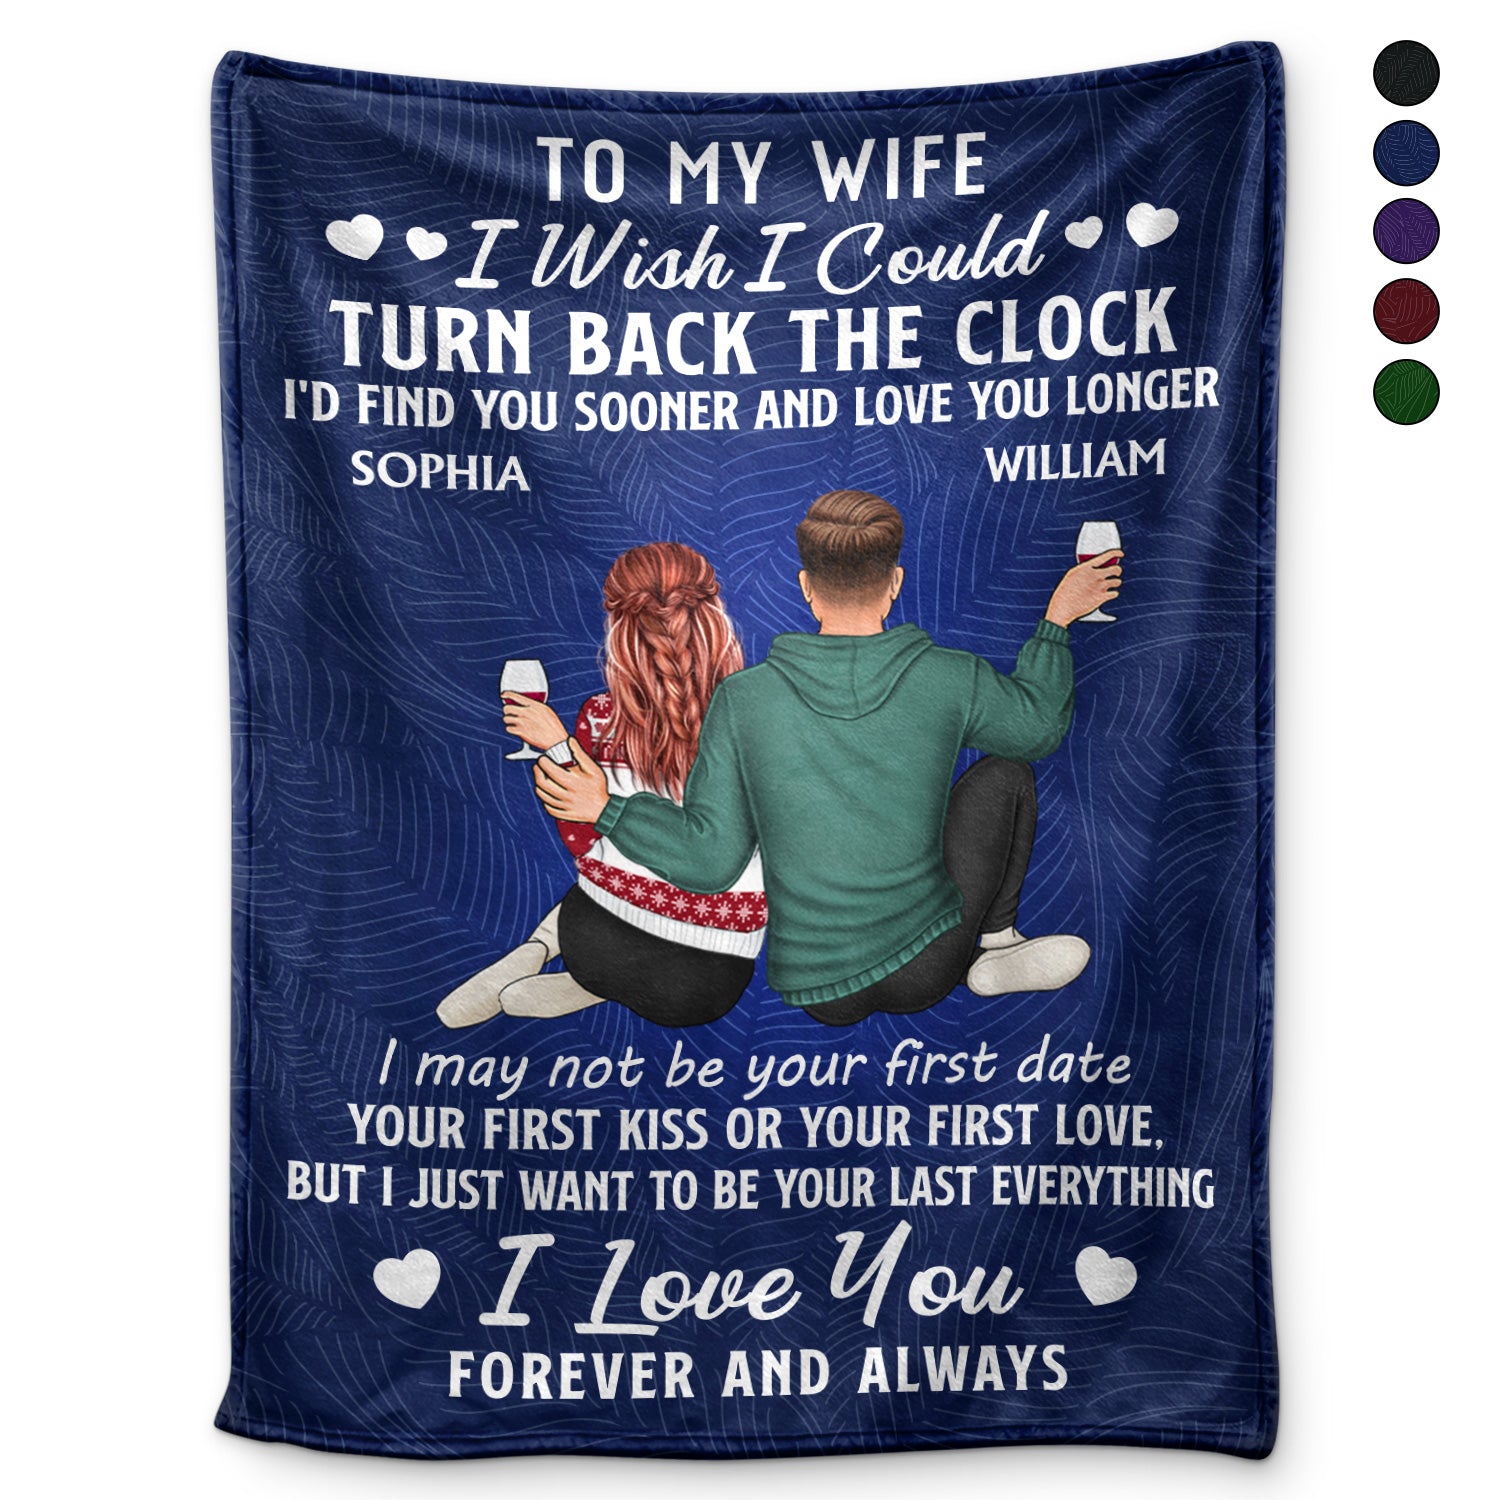 I Wish I Could Turn Back The Clock - Anniversary, Loving Gift For Couples, Husband, Wife - Personalized Fleece Blanket